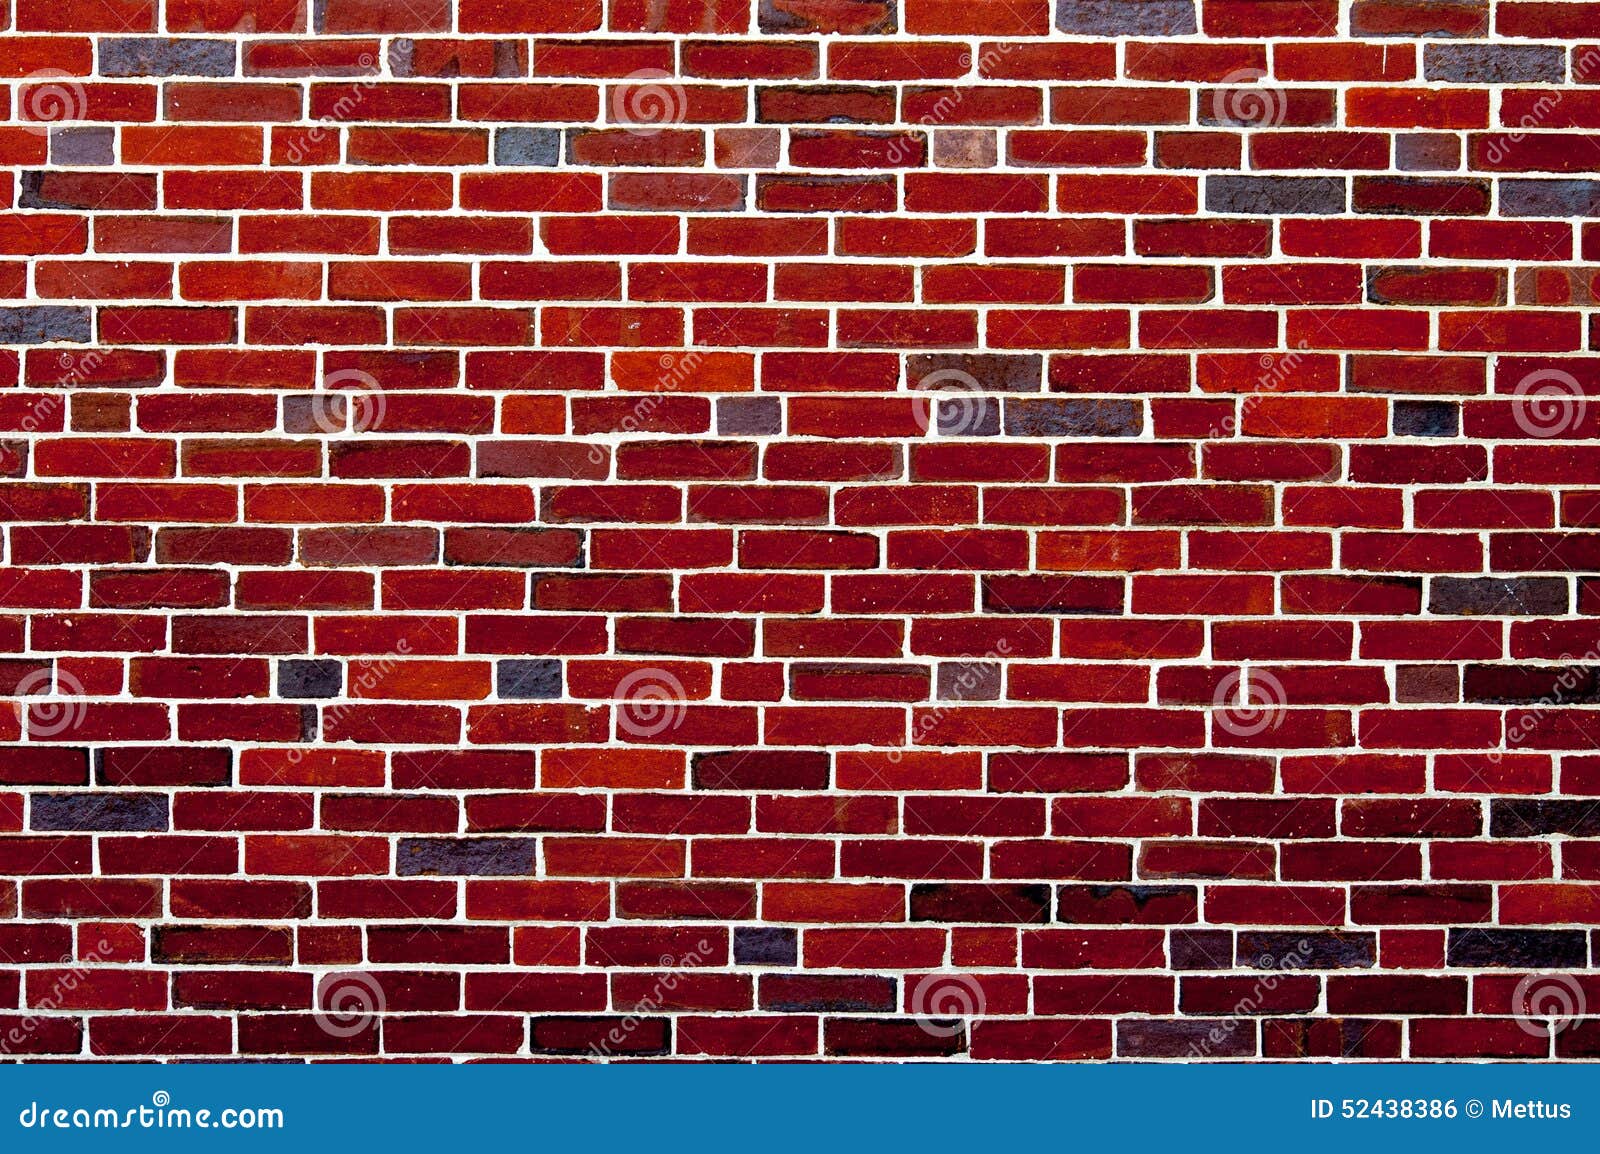 Broken Brick Wall Hole Building Background Breaching Of House Background  Image And Wallpaper for Free Download